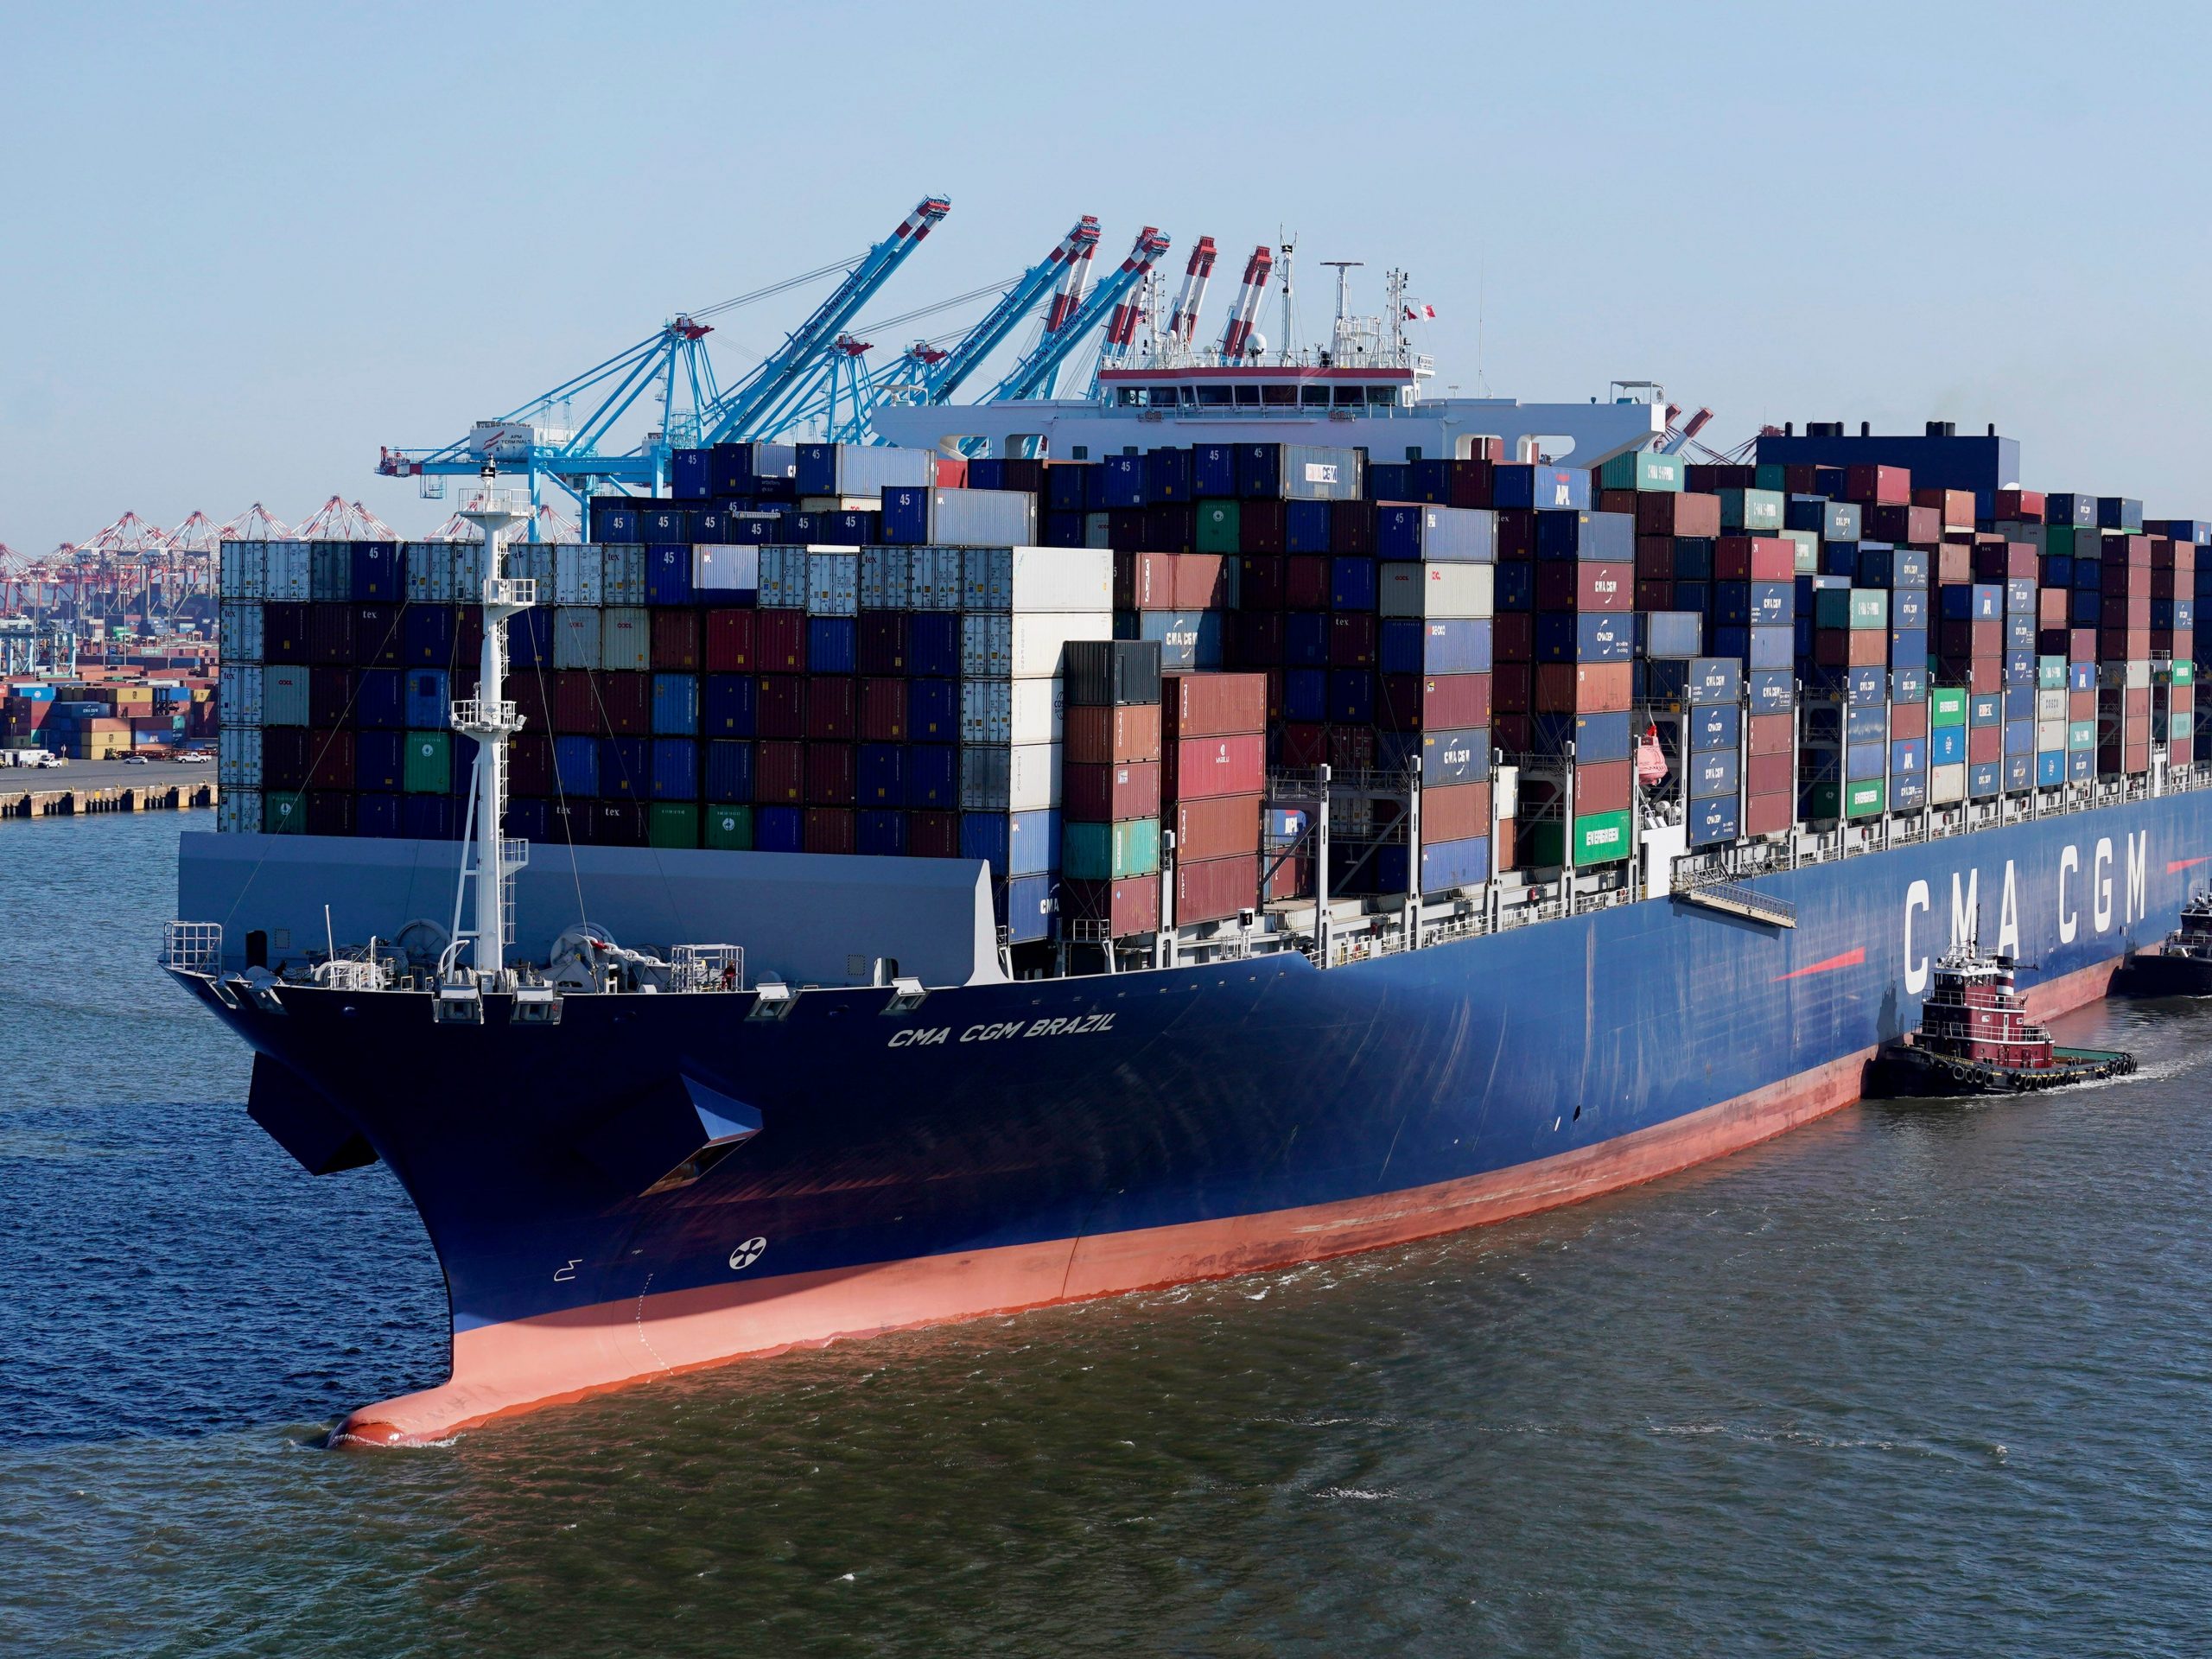 A large cargo ship filled with shipping containers